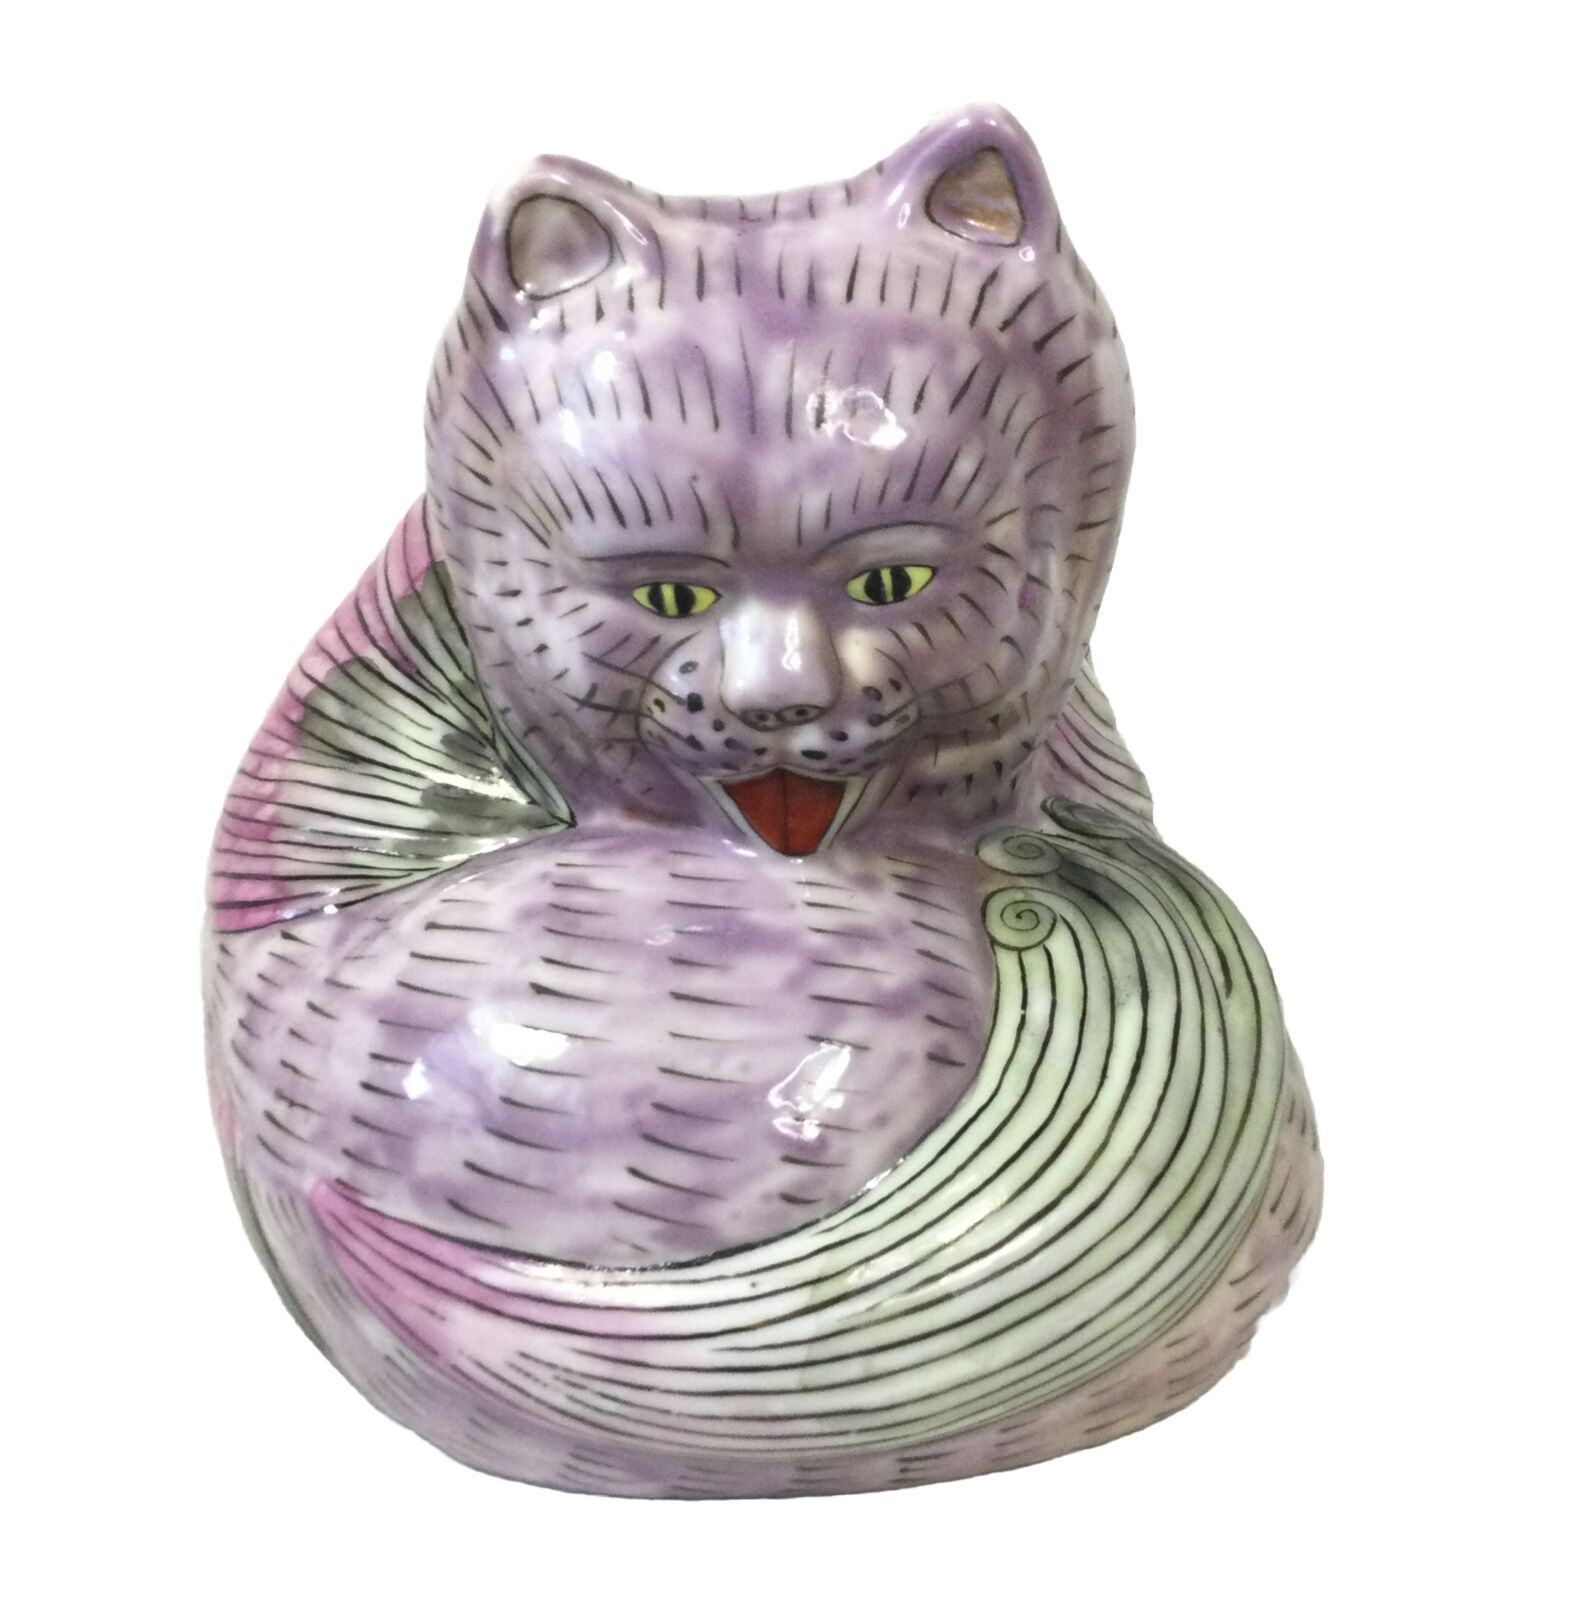 Vintage Cat Statue Chinese Ceramic Pink Purple Green 7” Tongue Out Grooming